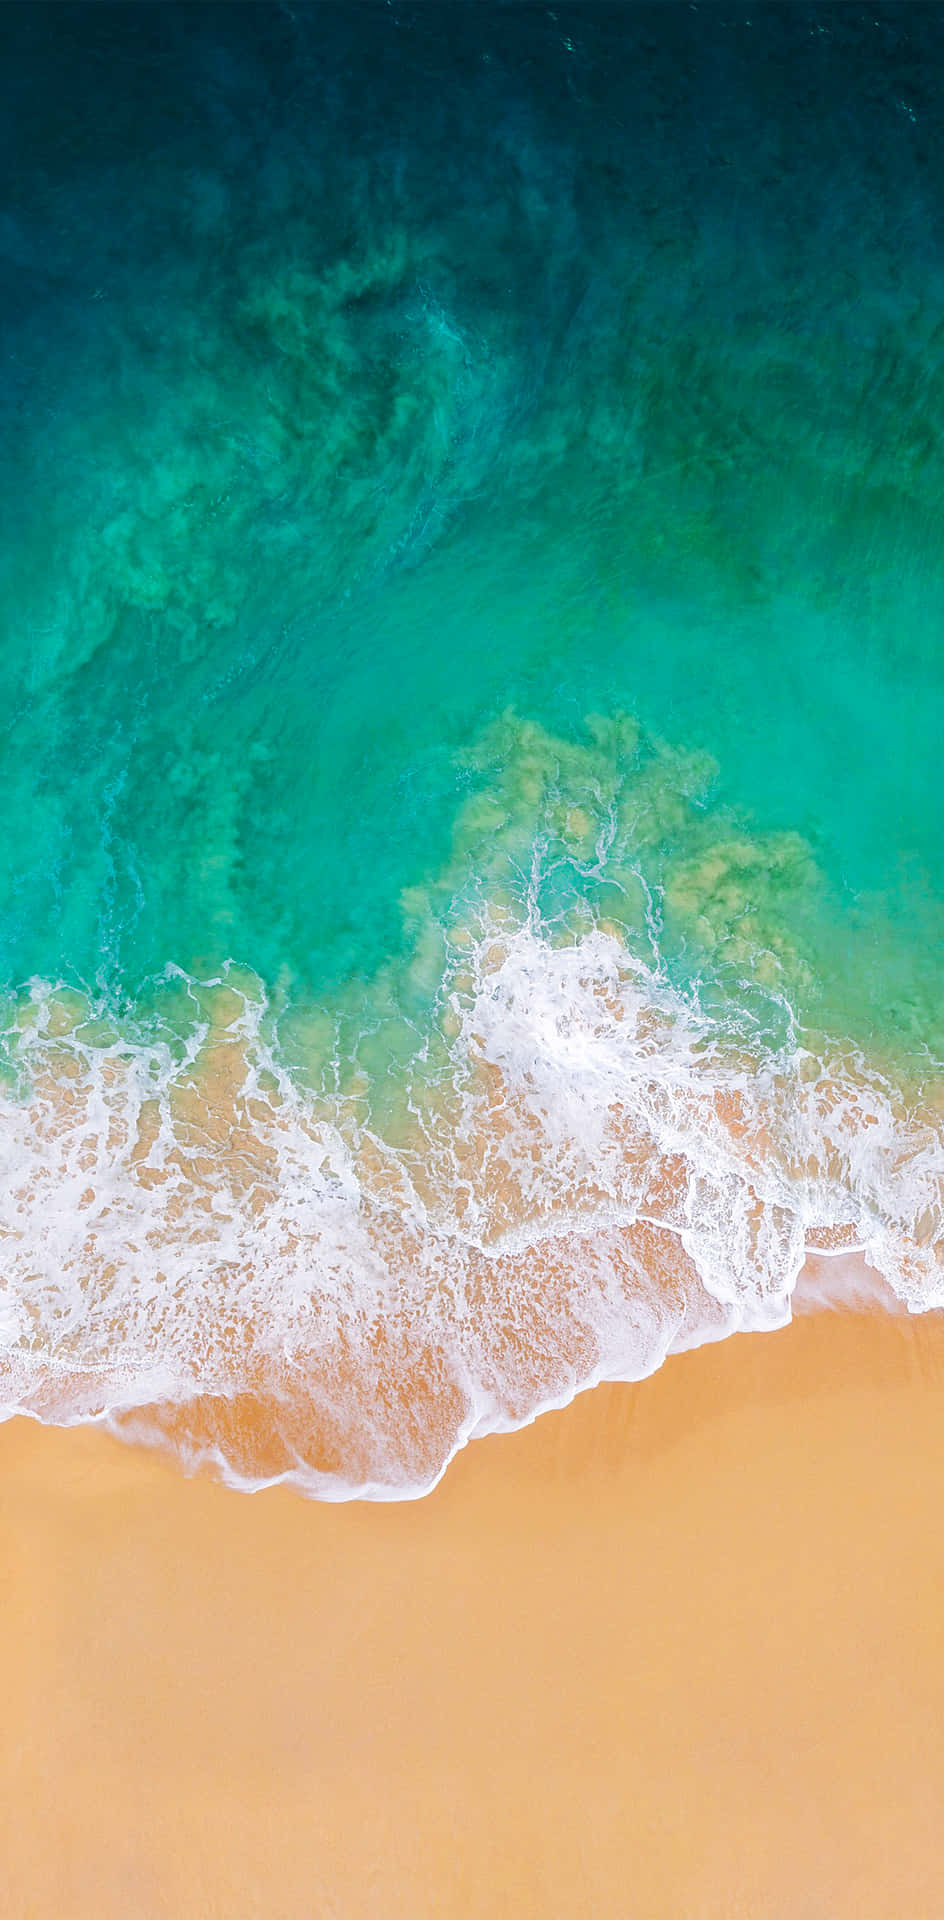 An Iphone submerged in Water Wallpaper